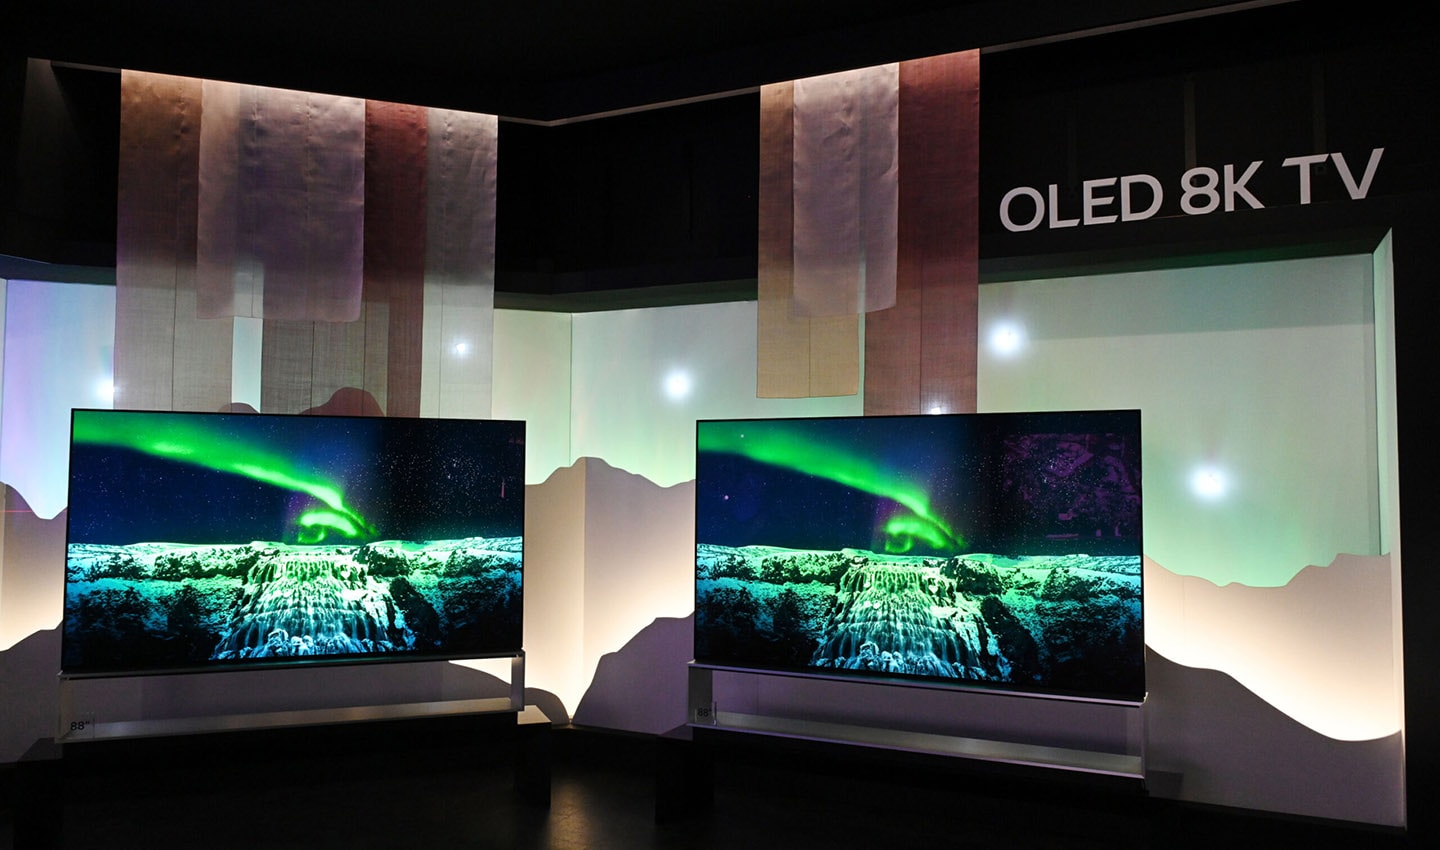 LG OLED 8K TV on display at LG's booth at CES 2023